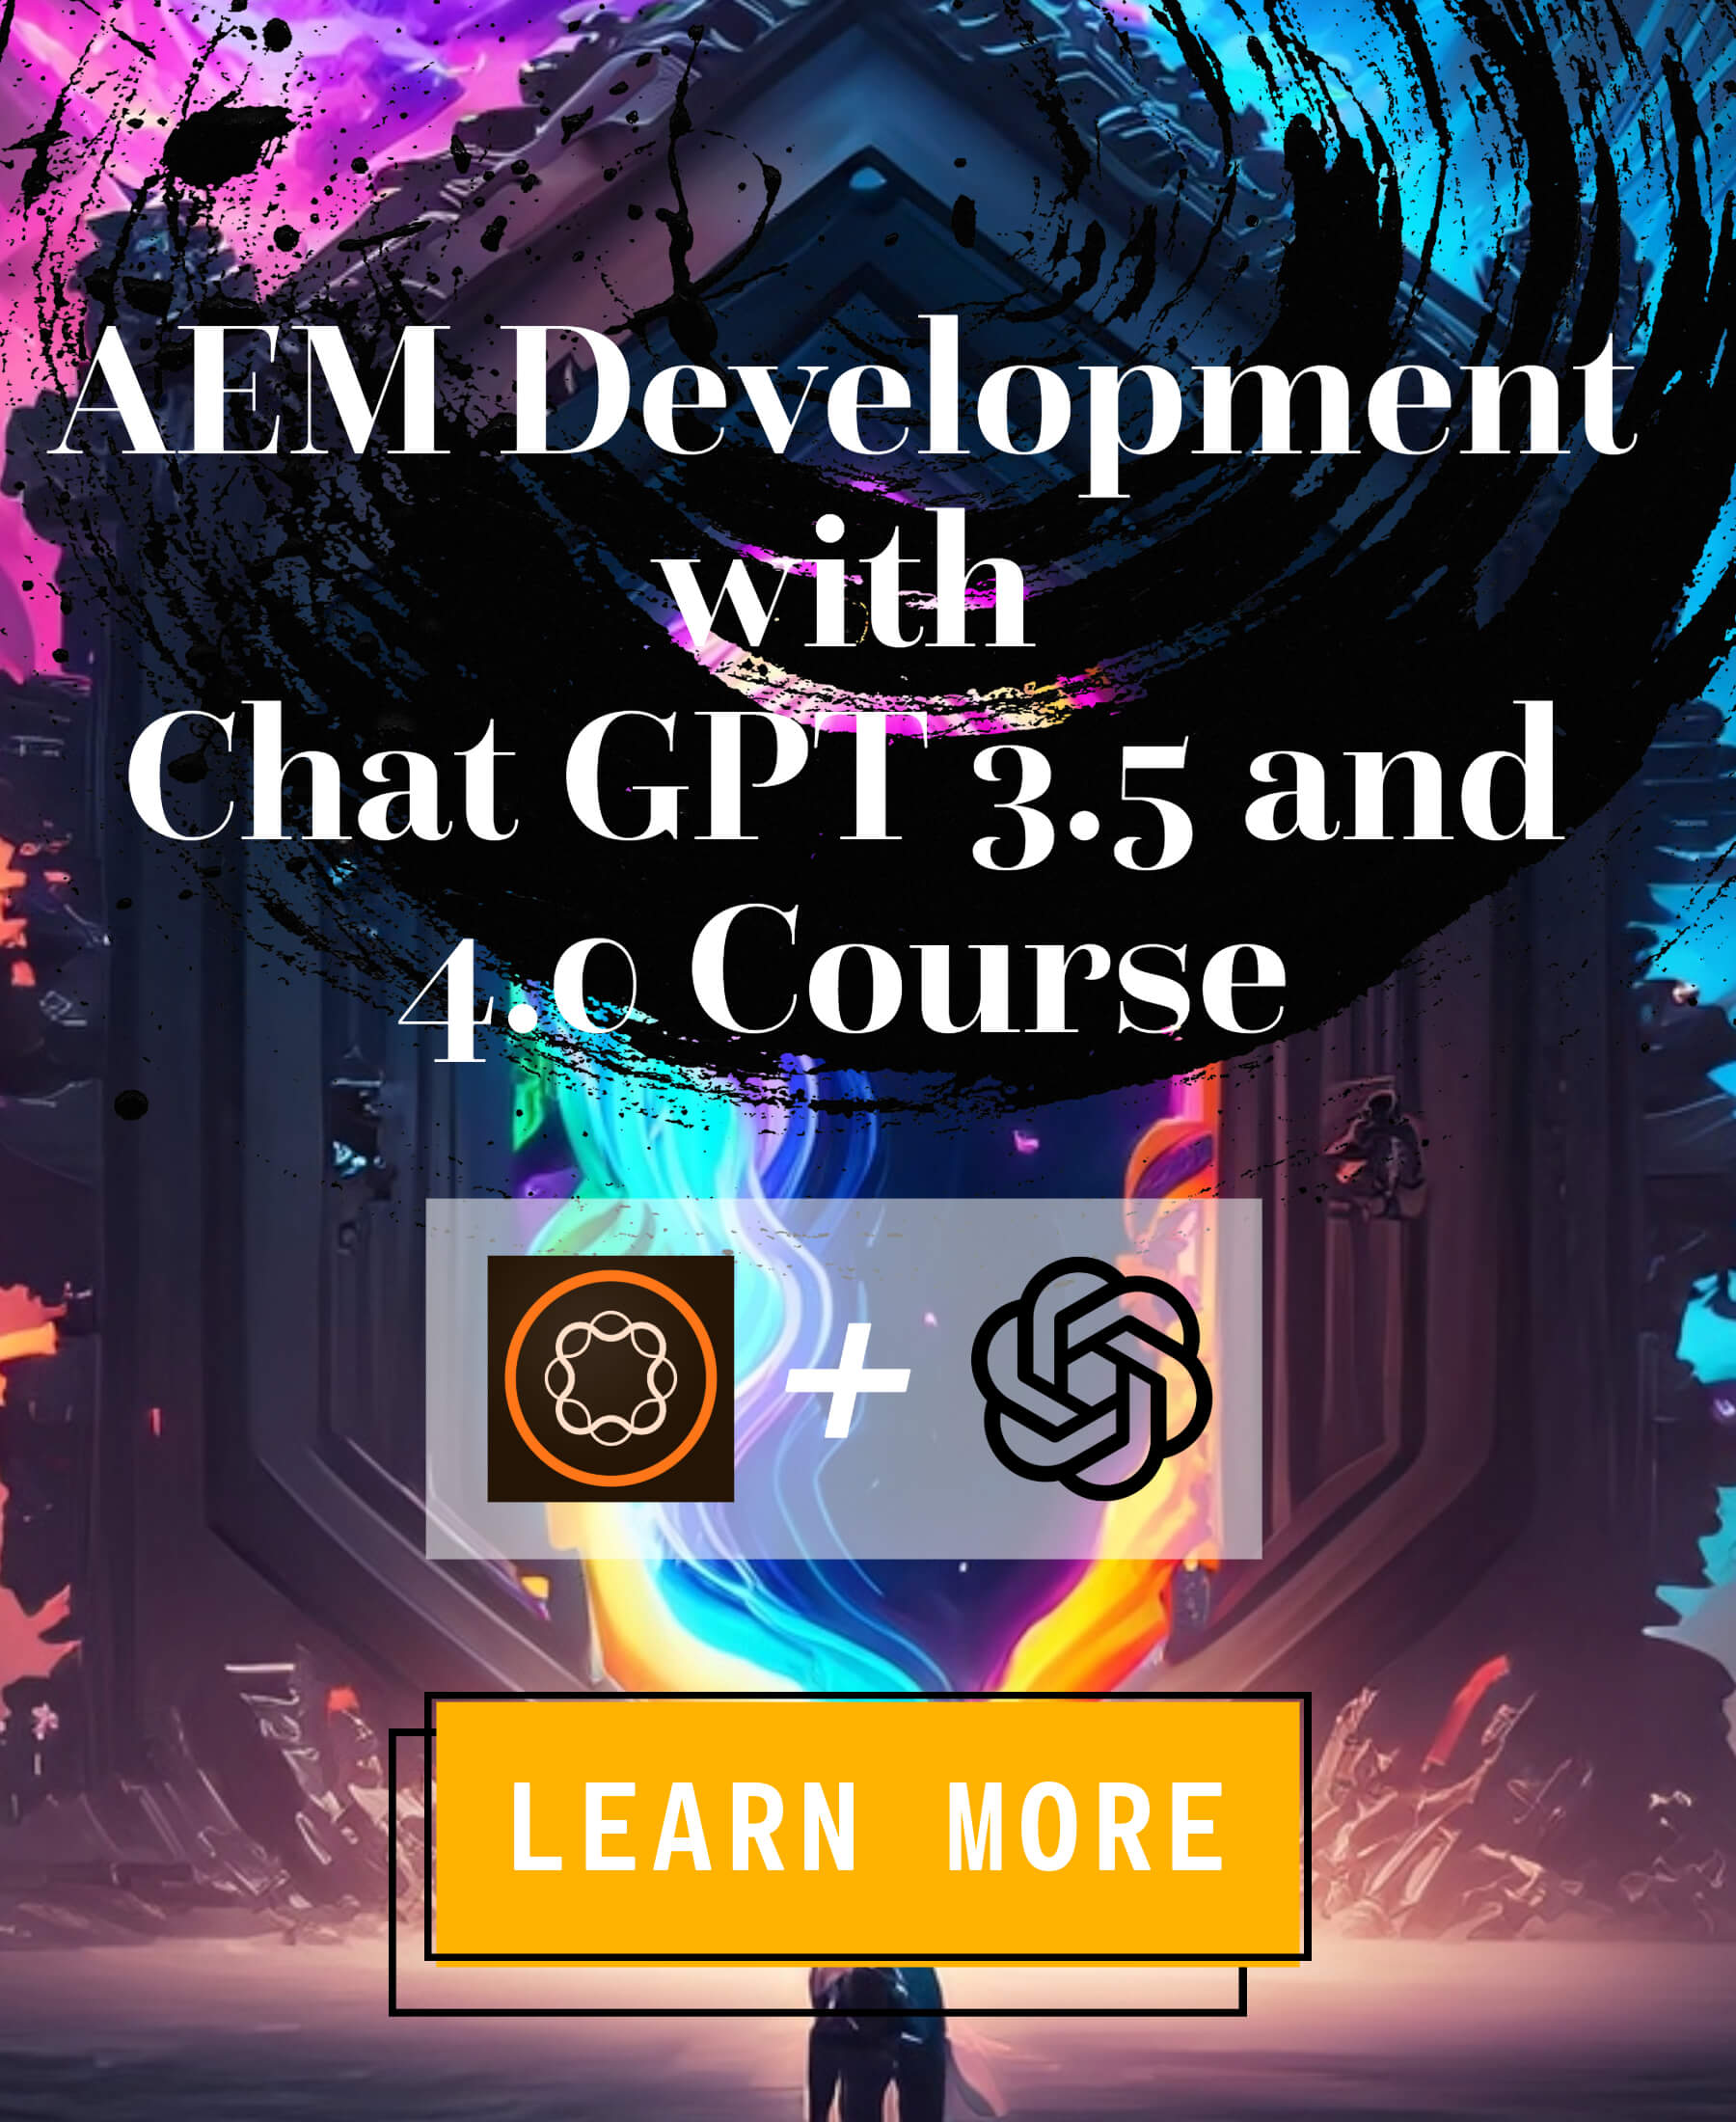 Learn to code with ChatGPT 3.5 and 4.0